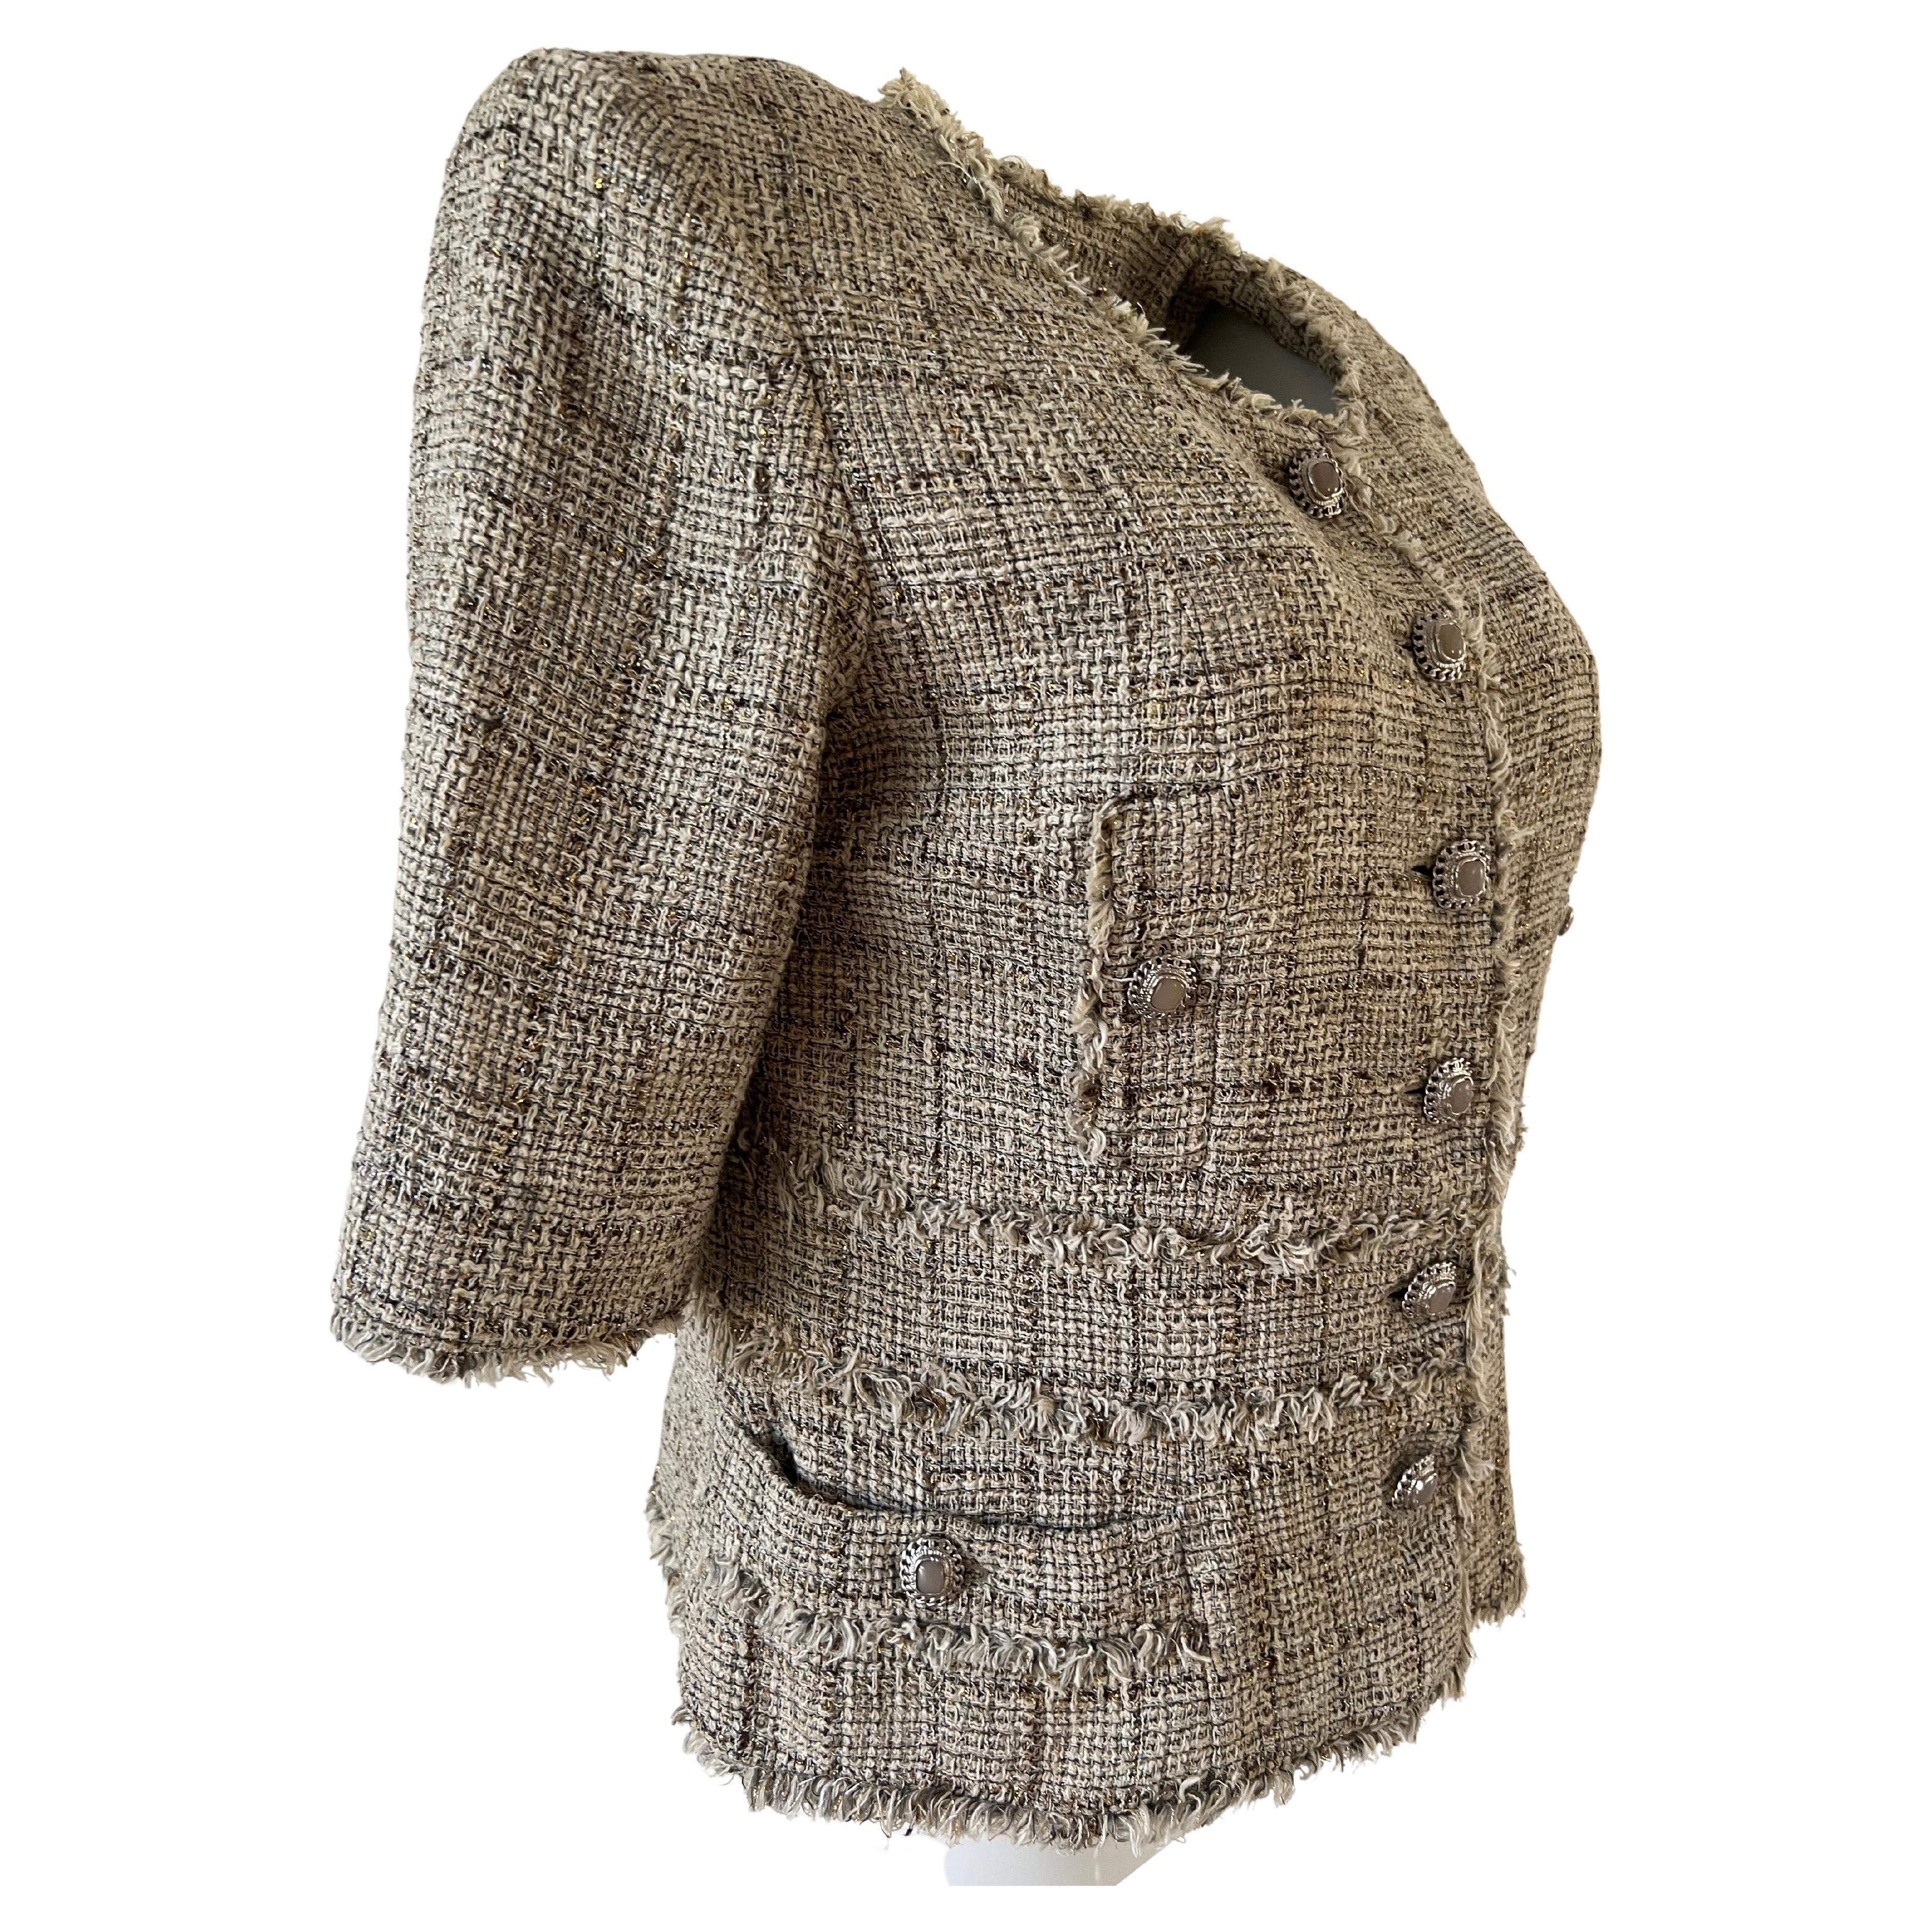 Beige Chanel jacket in cotton tweed blend of material with golden threads in the weaving. On the front, four pockets each enhanced with their button. The waist is underlined by a yoke. the whole braided by the threads of the weaving. Six buttons